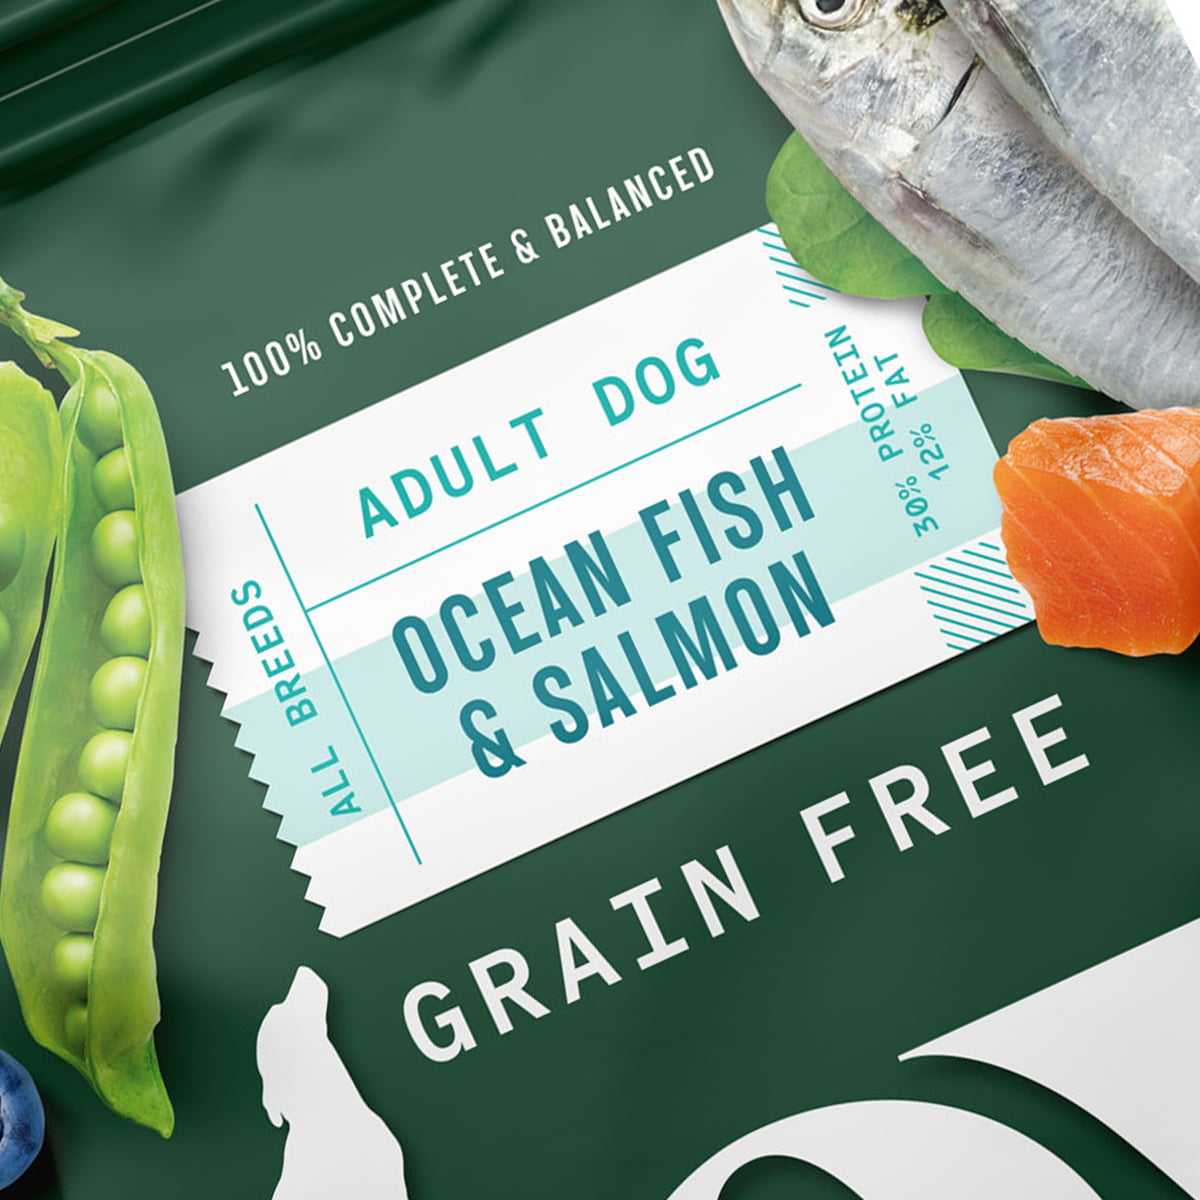 boxer-and-co-brand-packaging-design-sydney-agency-ticket-ocean-fish-salmon-real-ingredients-blue-green-delicious-pet-food